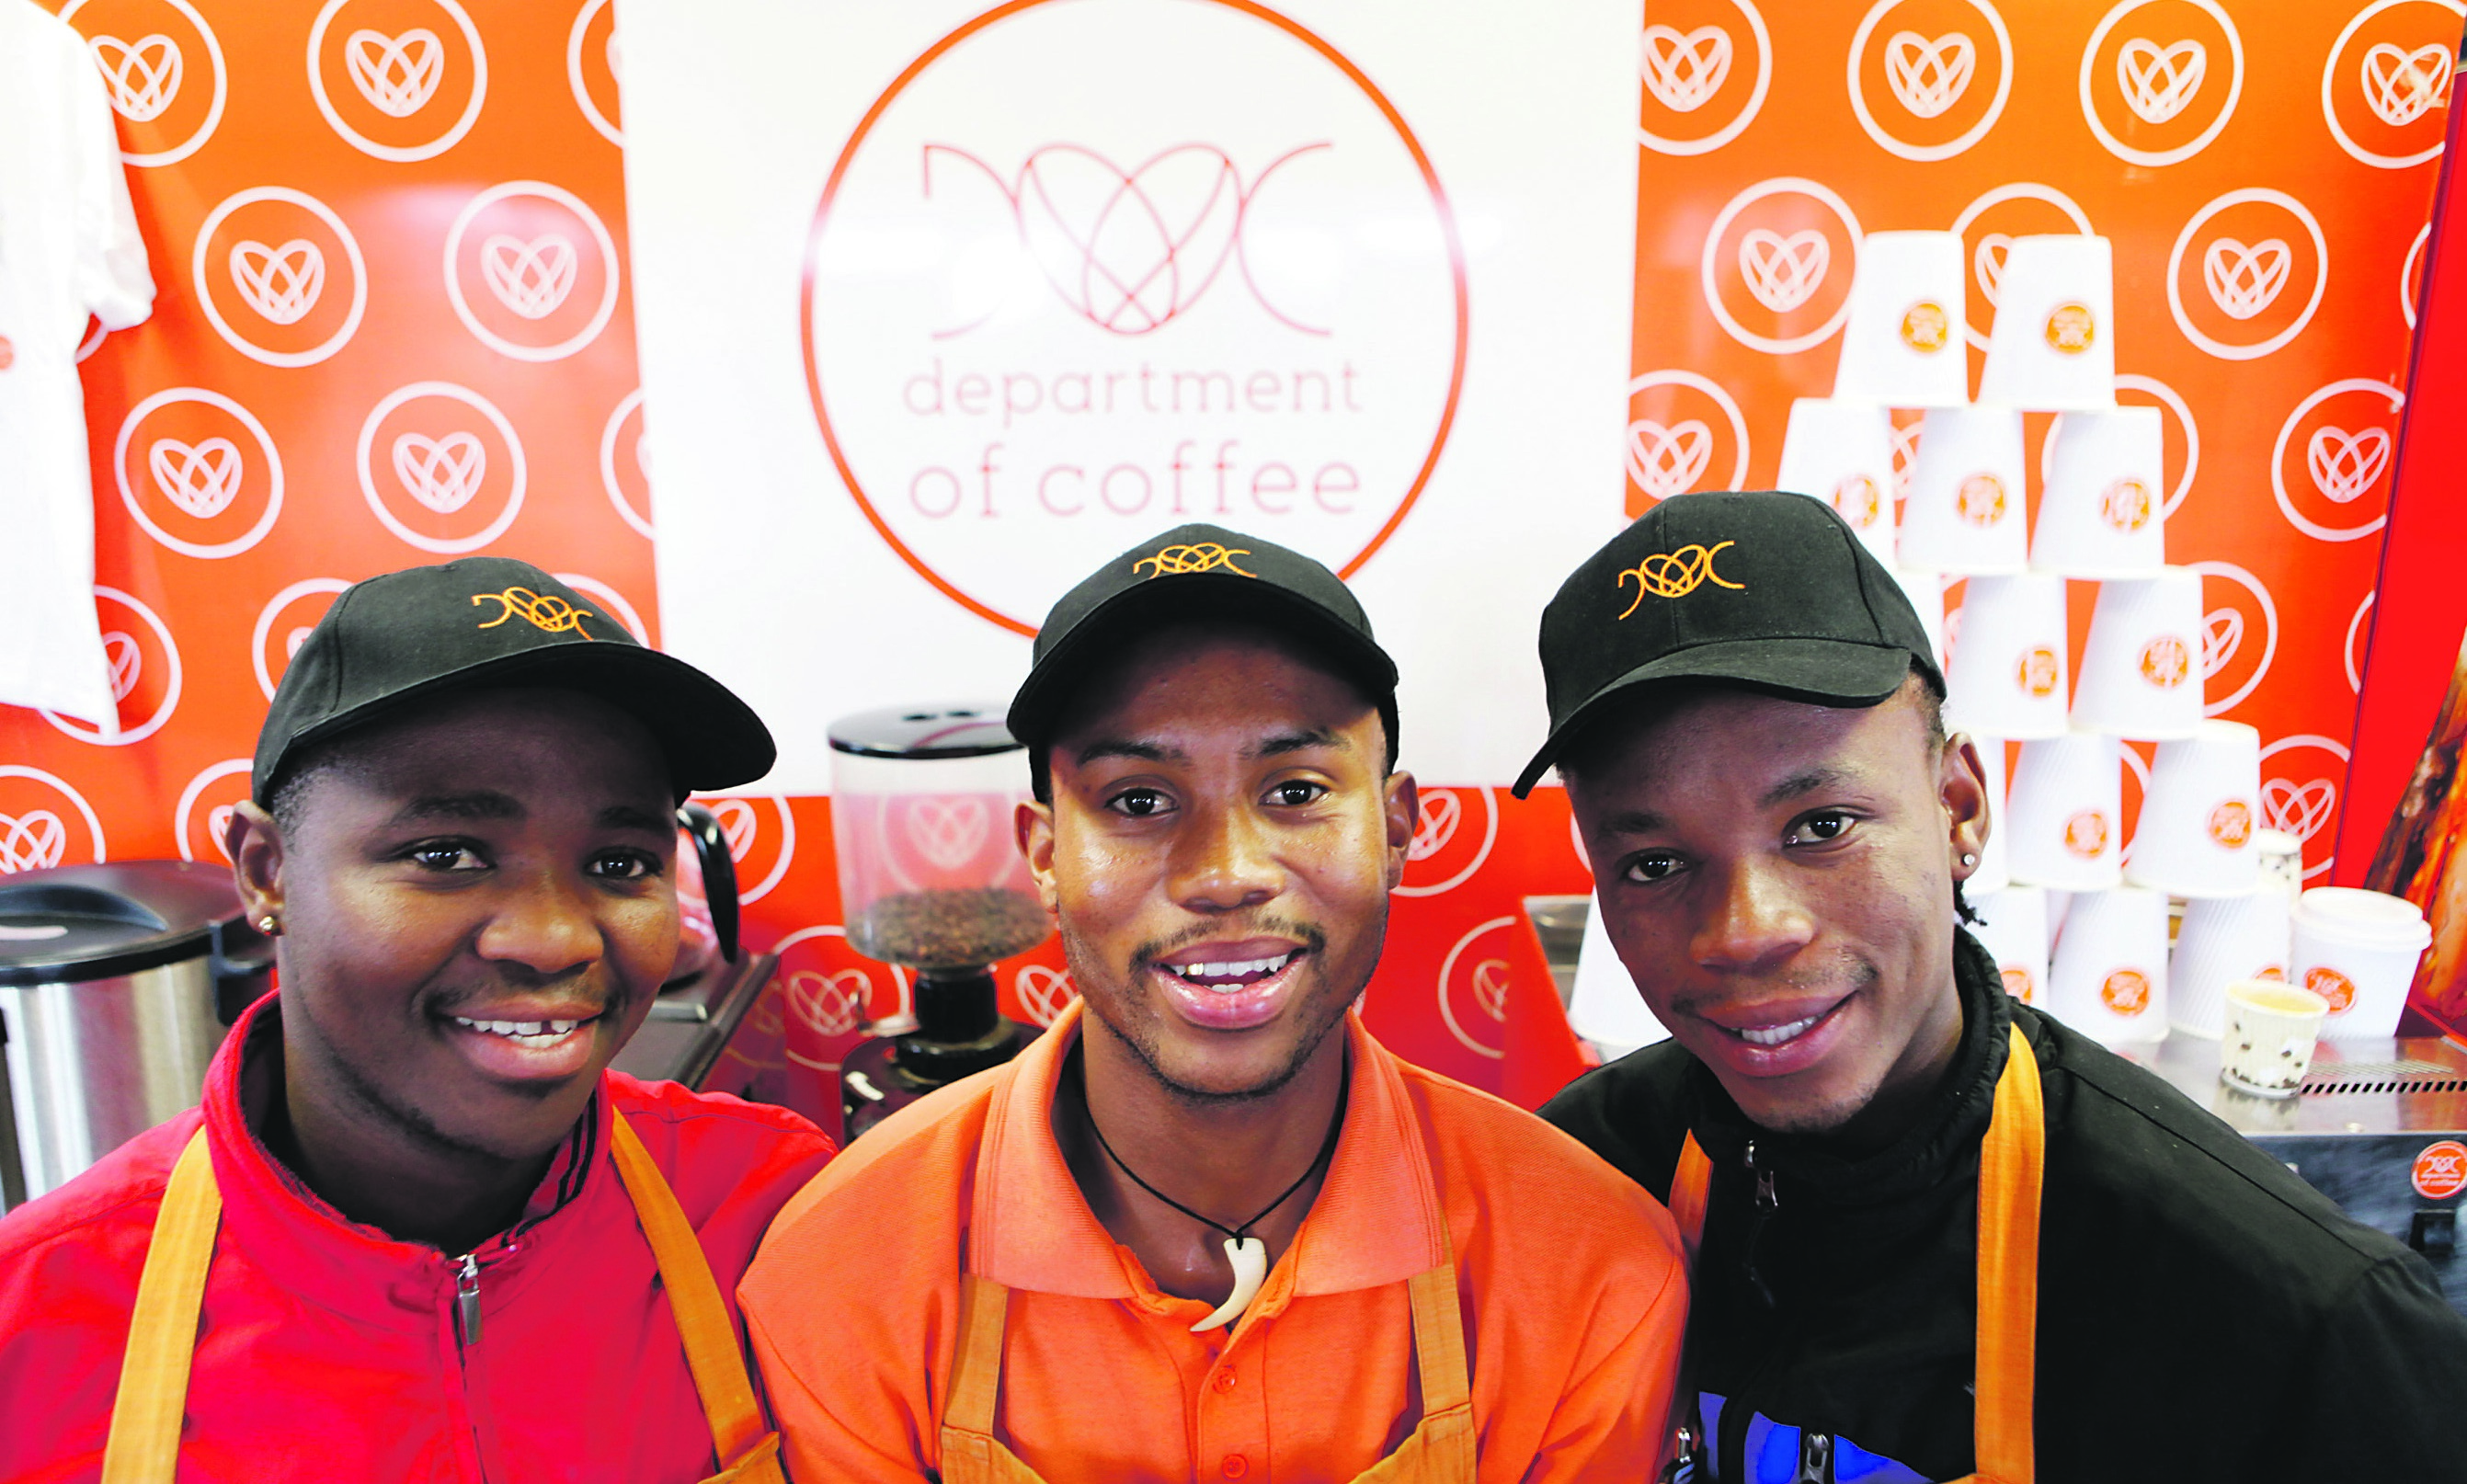 caffeine captains
 From left: Vusumzi Mamile, Wongama Baleni and Vuyile Msaku are owners of the Department of Coffee in Khayelitsha, Cape Town. They are now planning to open a second coffee shop in Philippi 

PHOTO: wikus de wet

